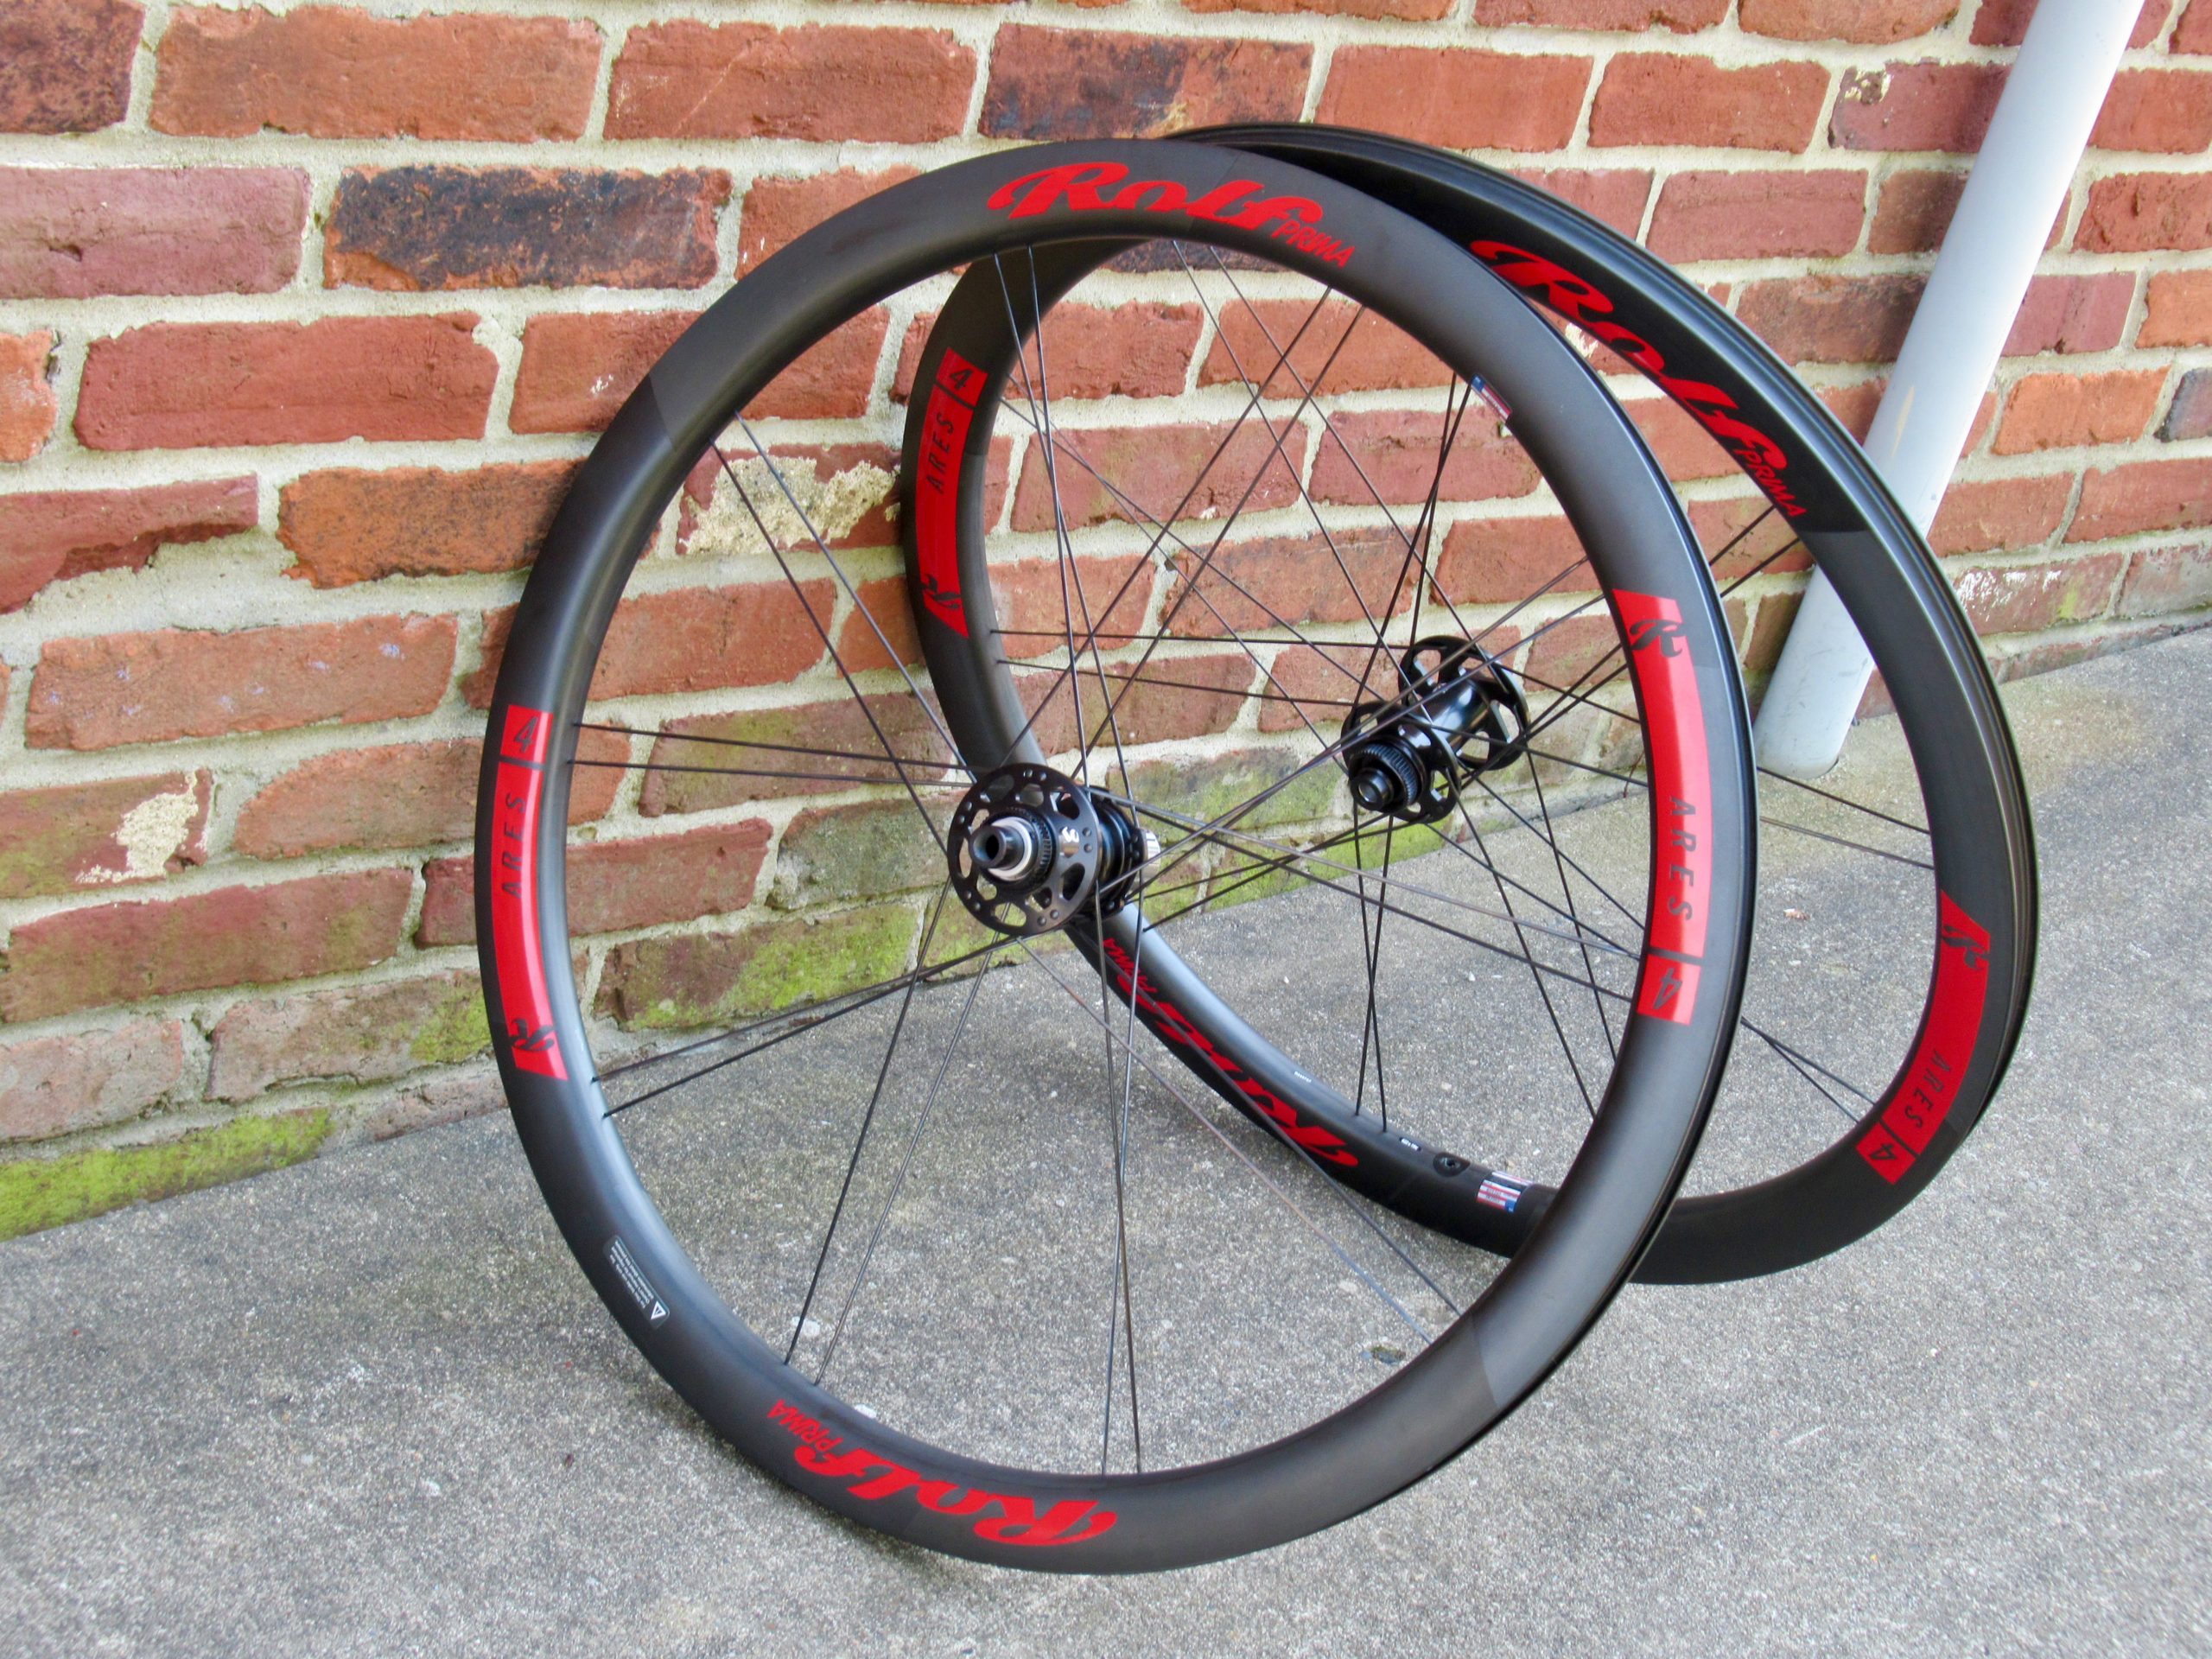 Review: Rolf Prima Ares 4 Disc wheels are fast on the road and